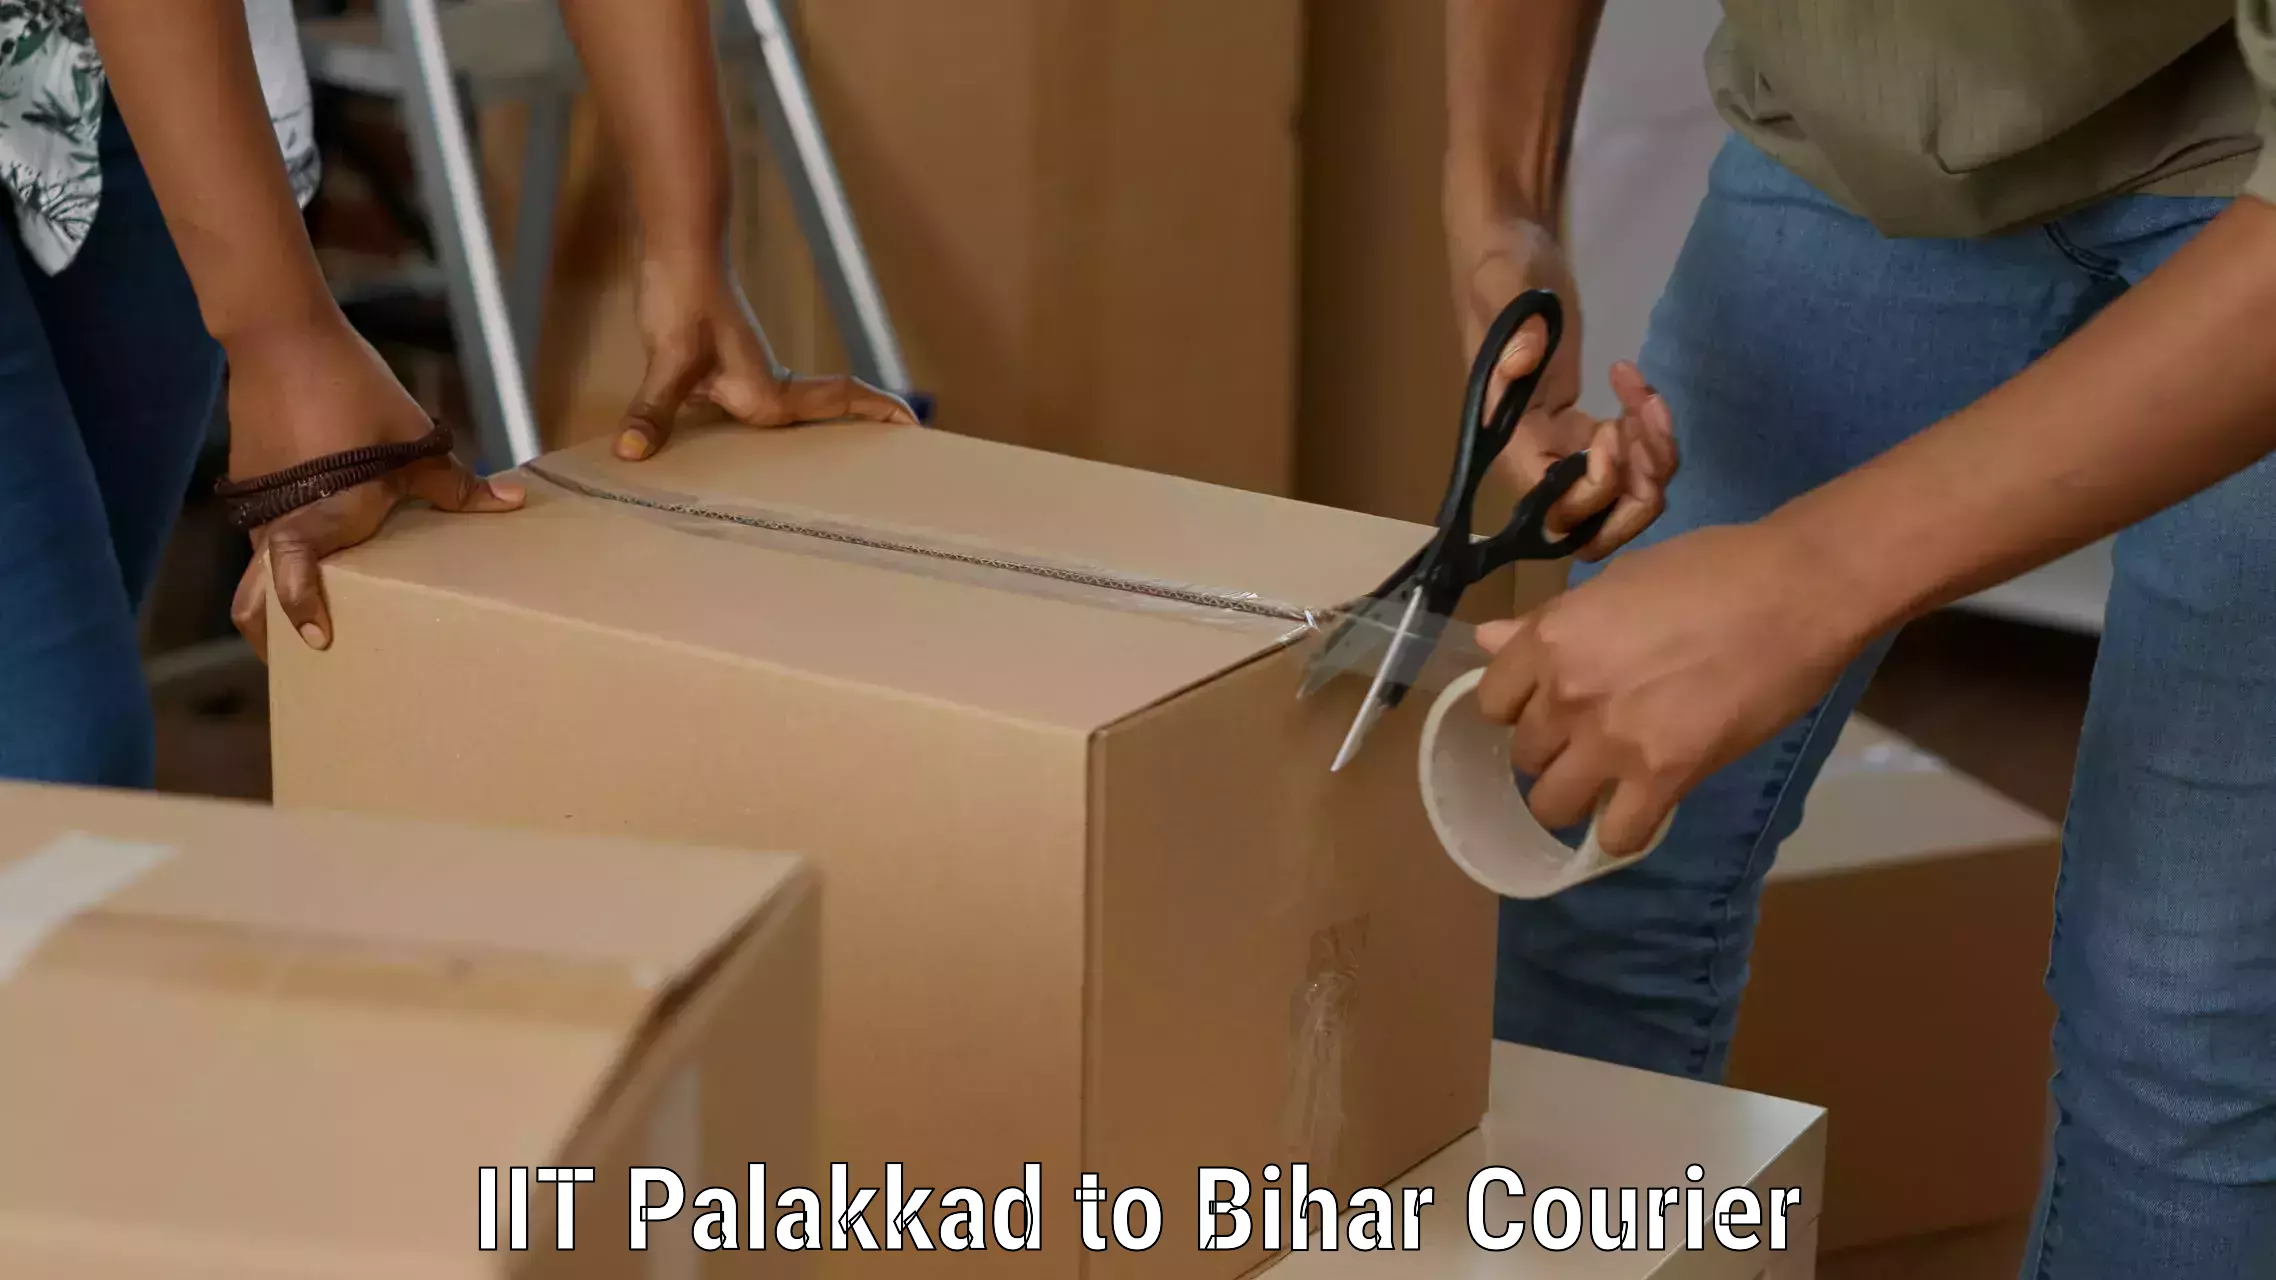 Package delivery network IIT Palakkad to Kudra